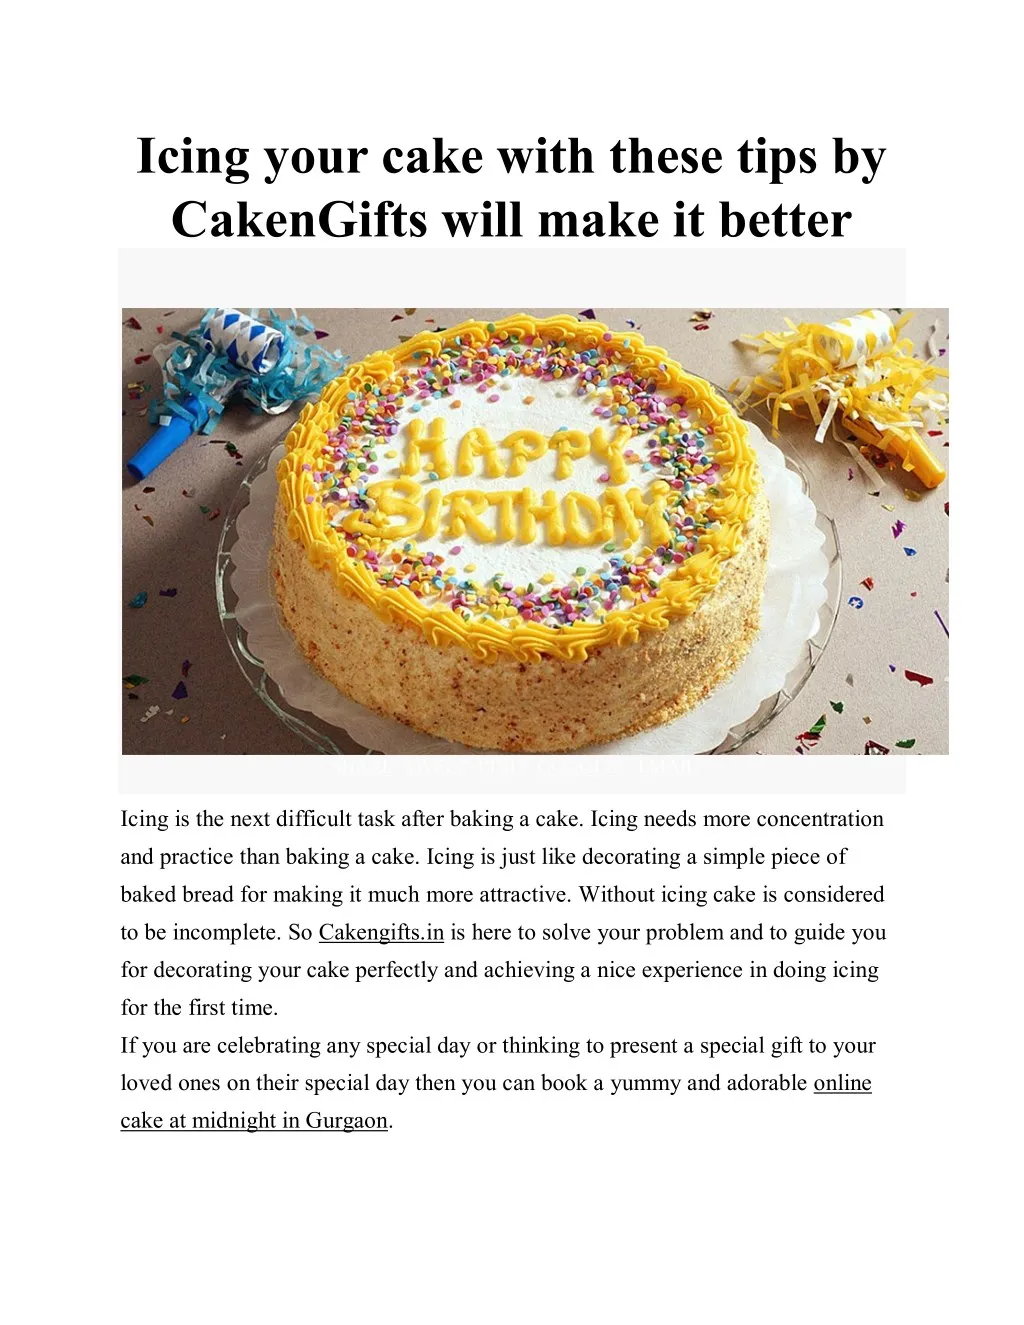 icing your cake with these tips by cakengifts